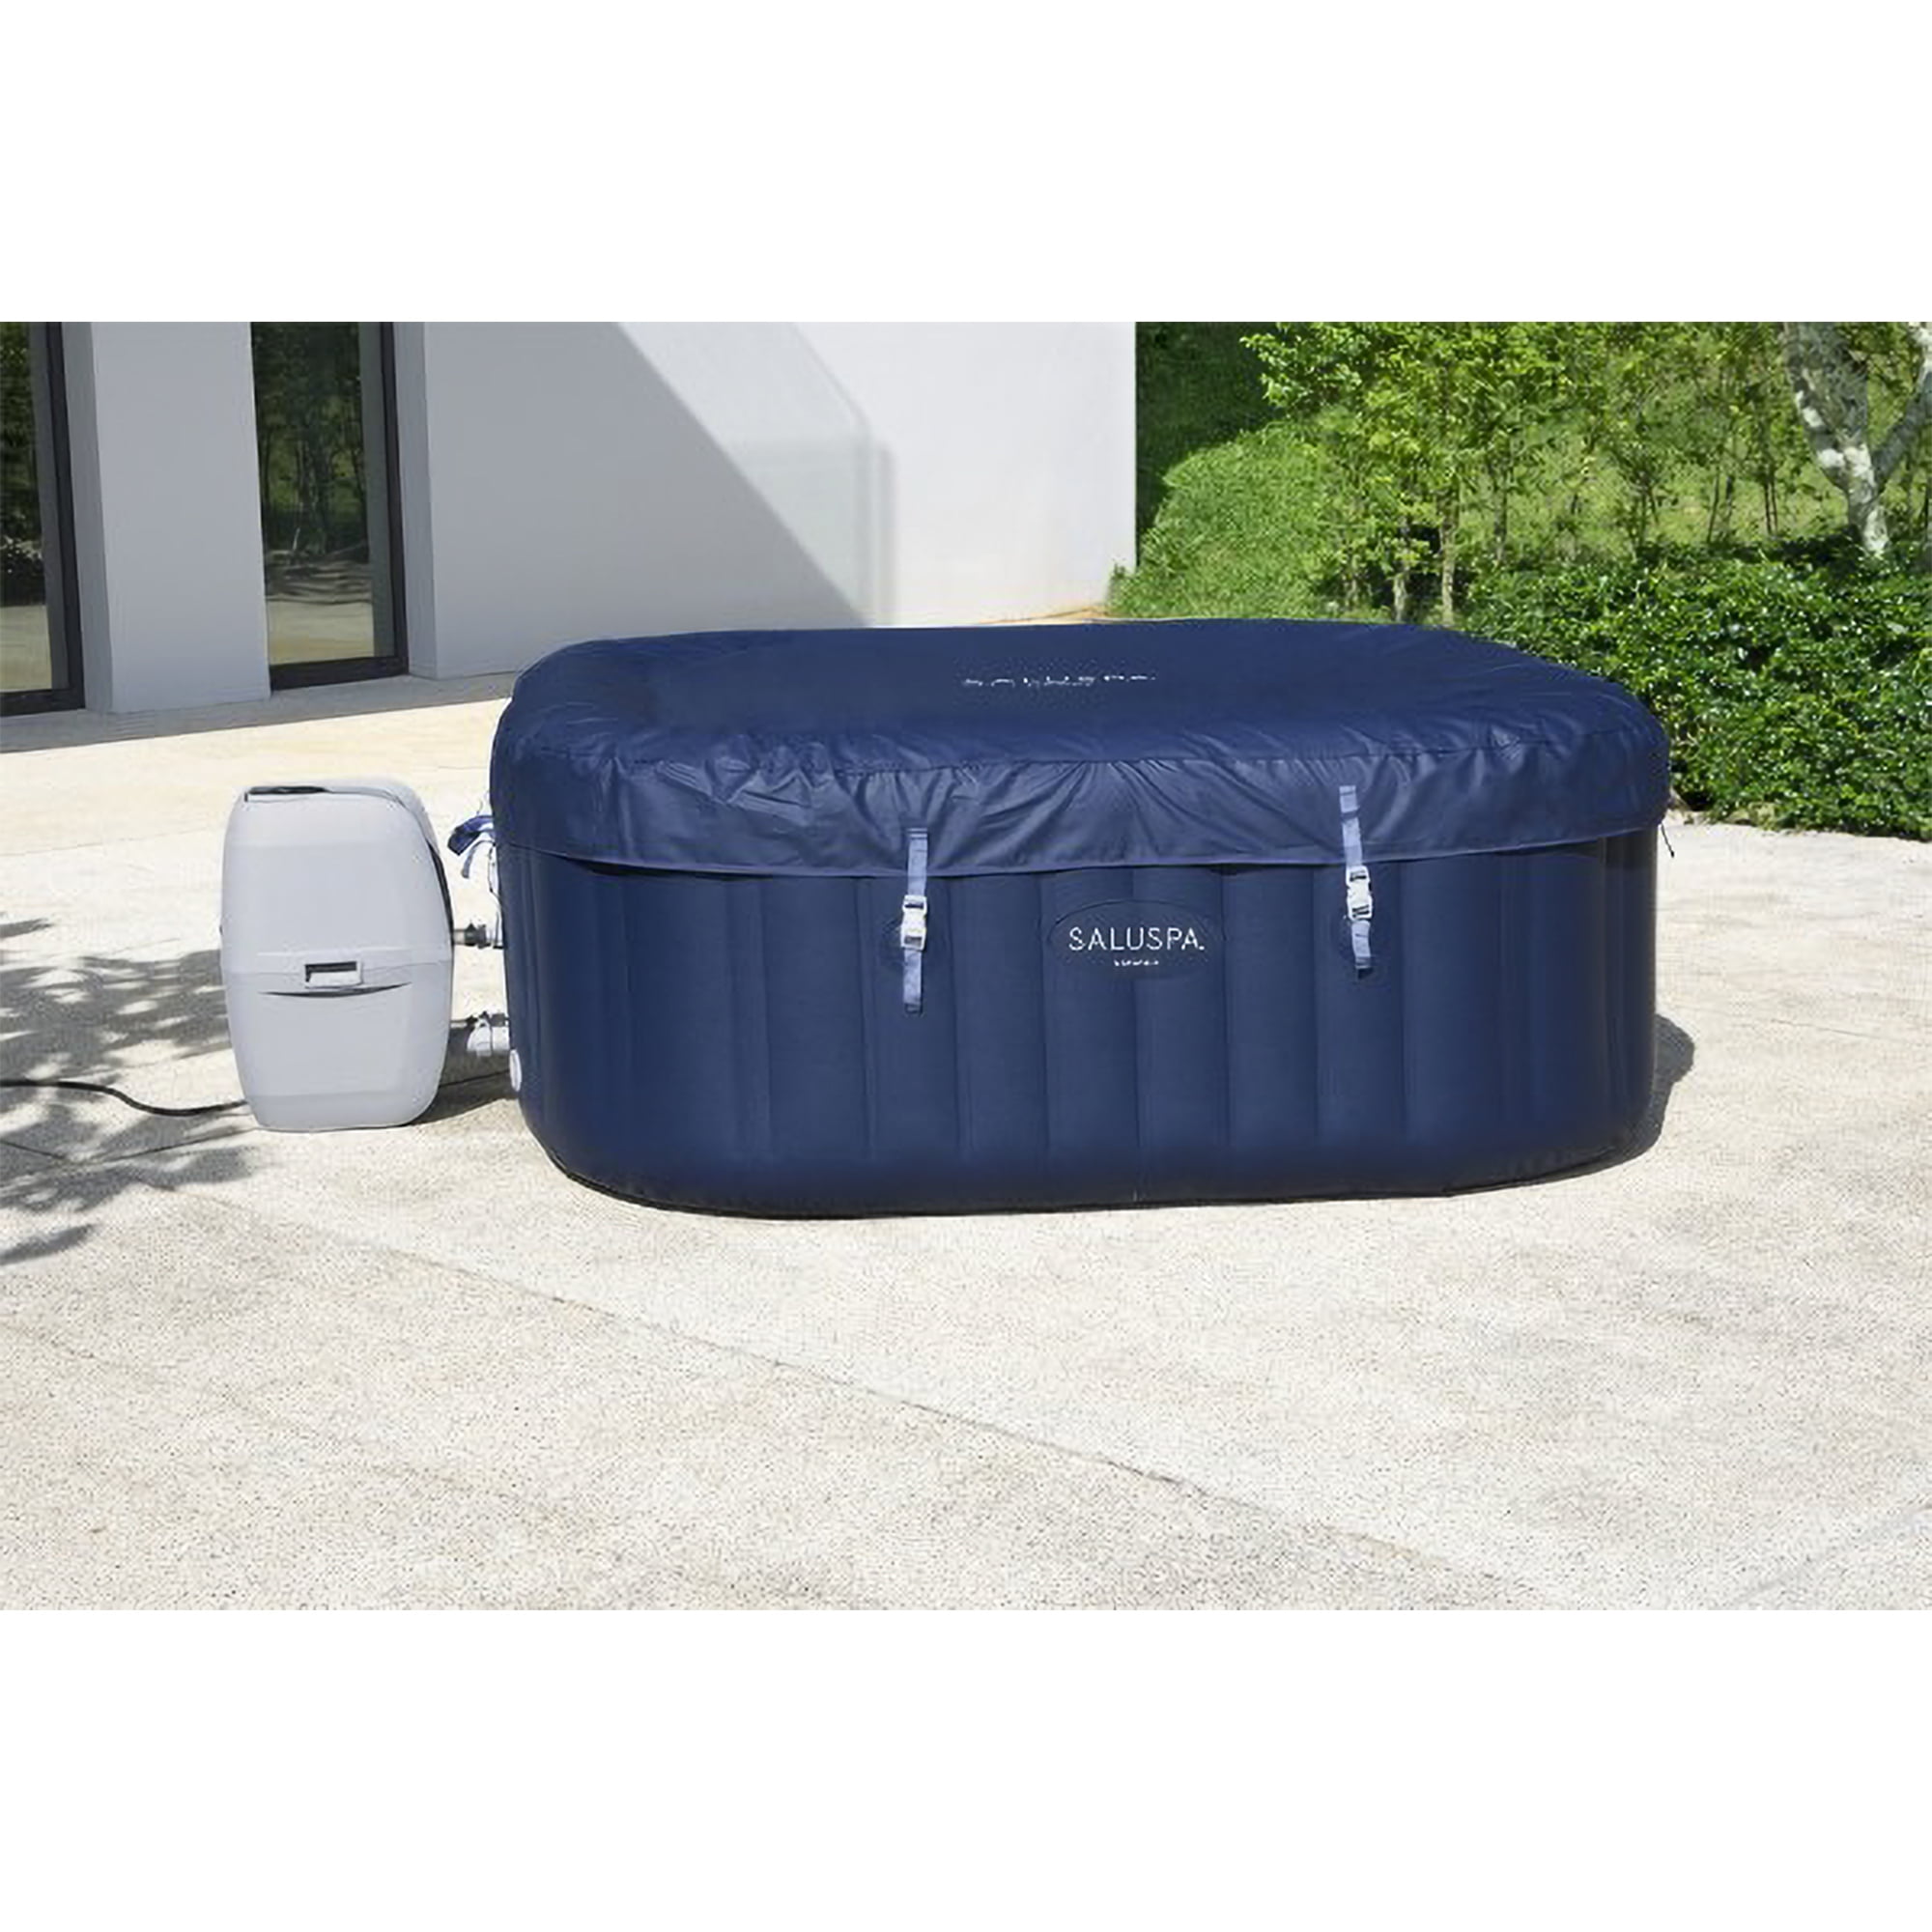 Bestway SaluSpa Hawaii AirJet Inflatable Tub Blue 114 Jets, with Hot